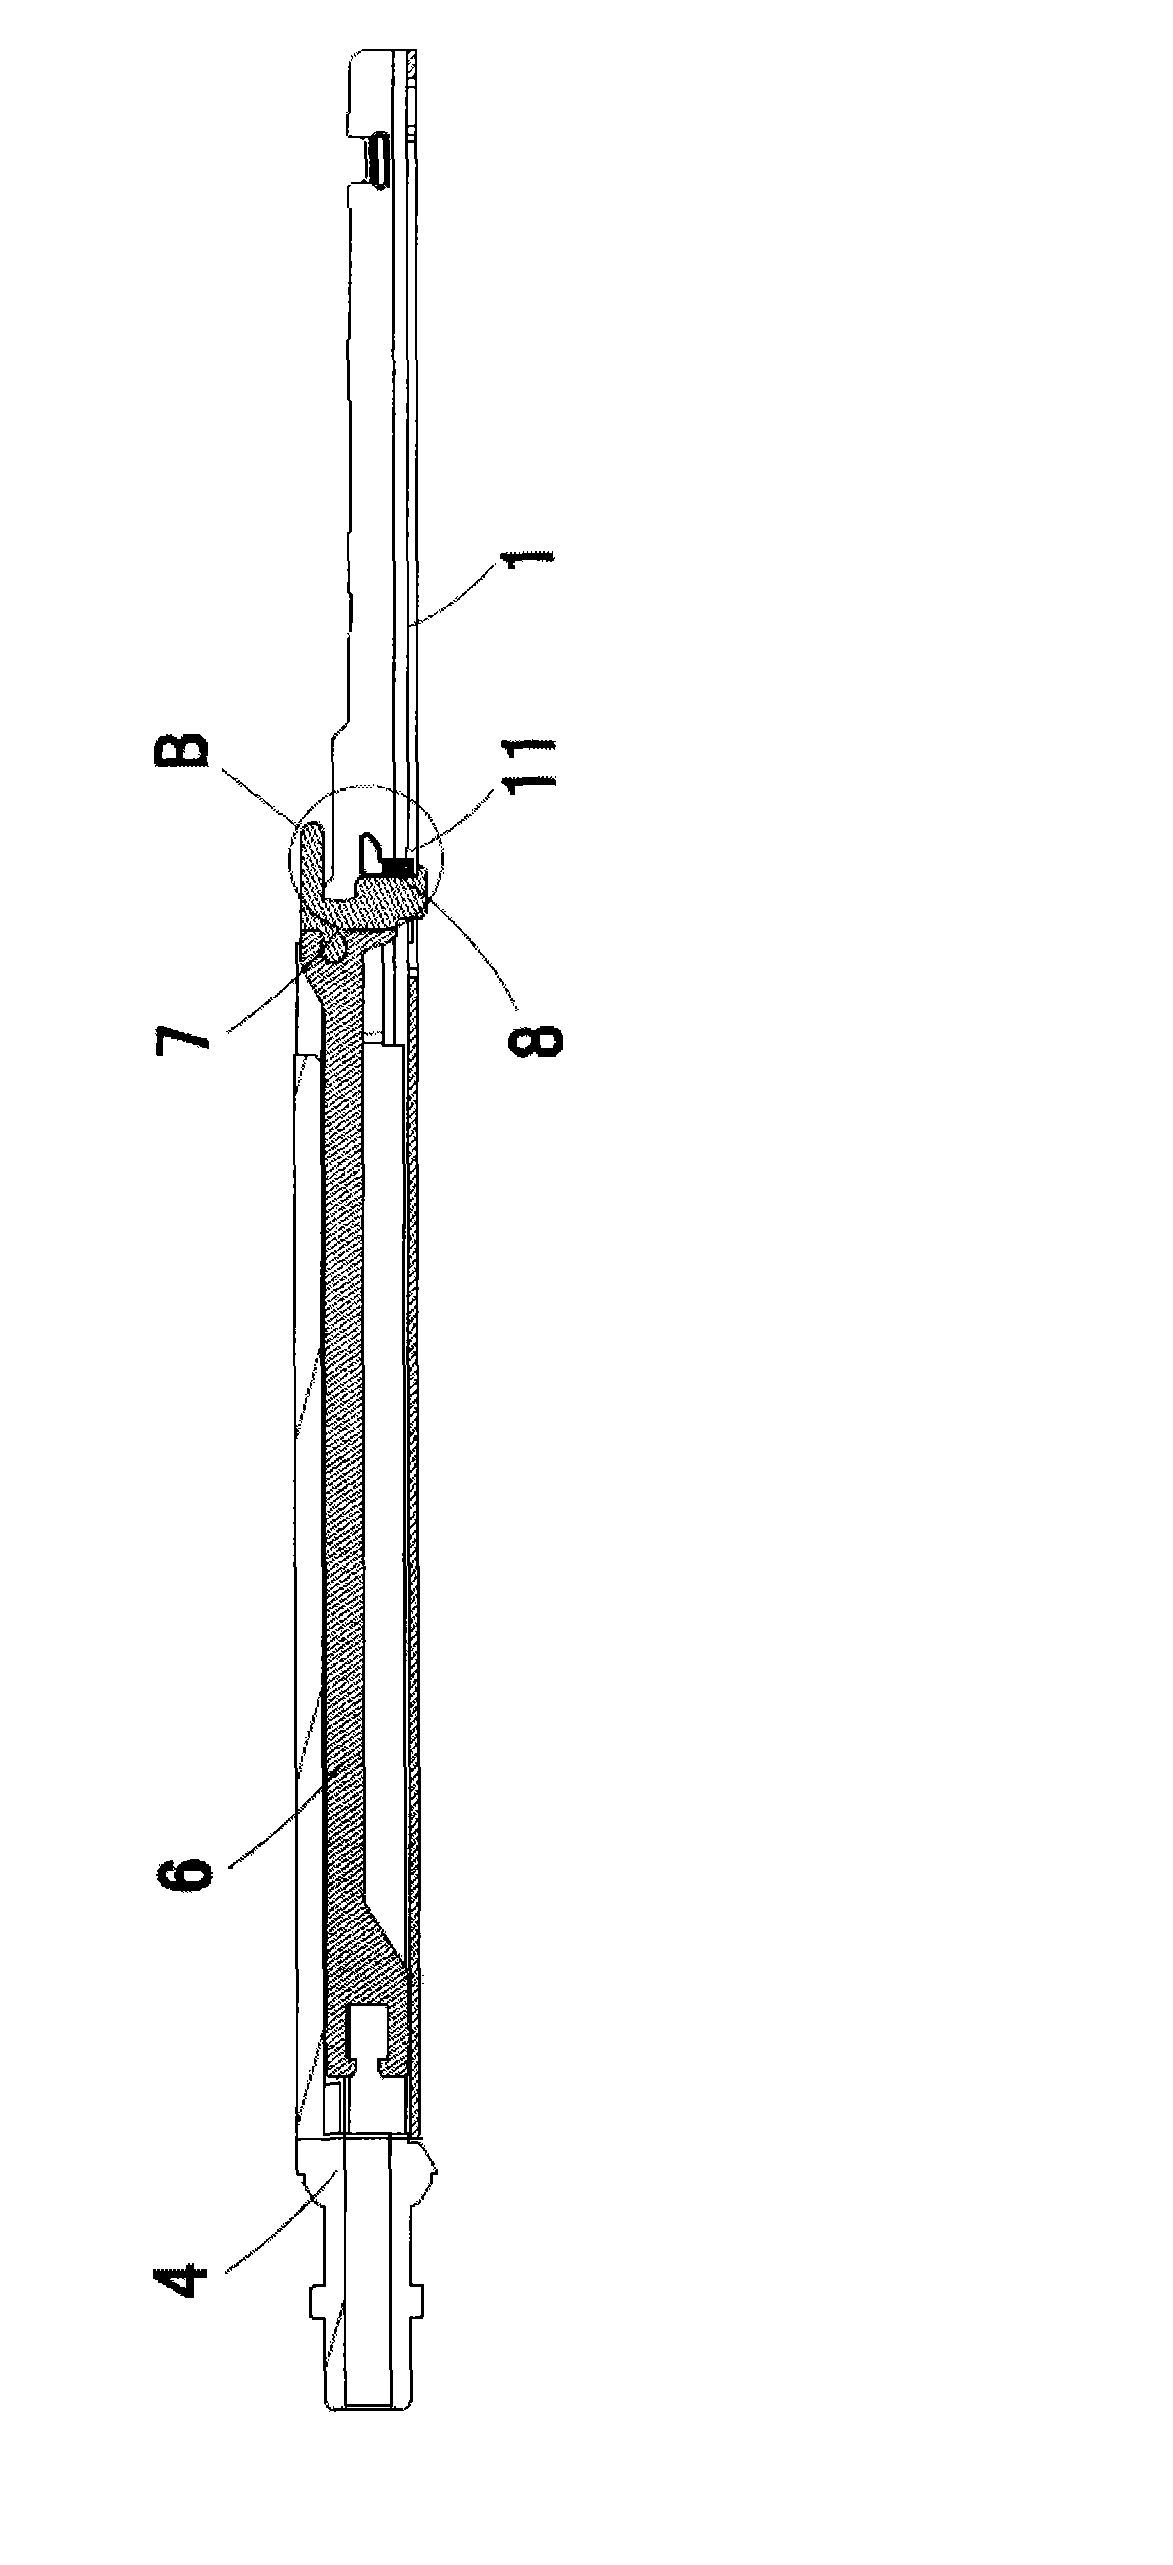 Linear suturing and excising device